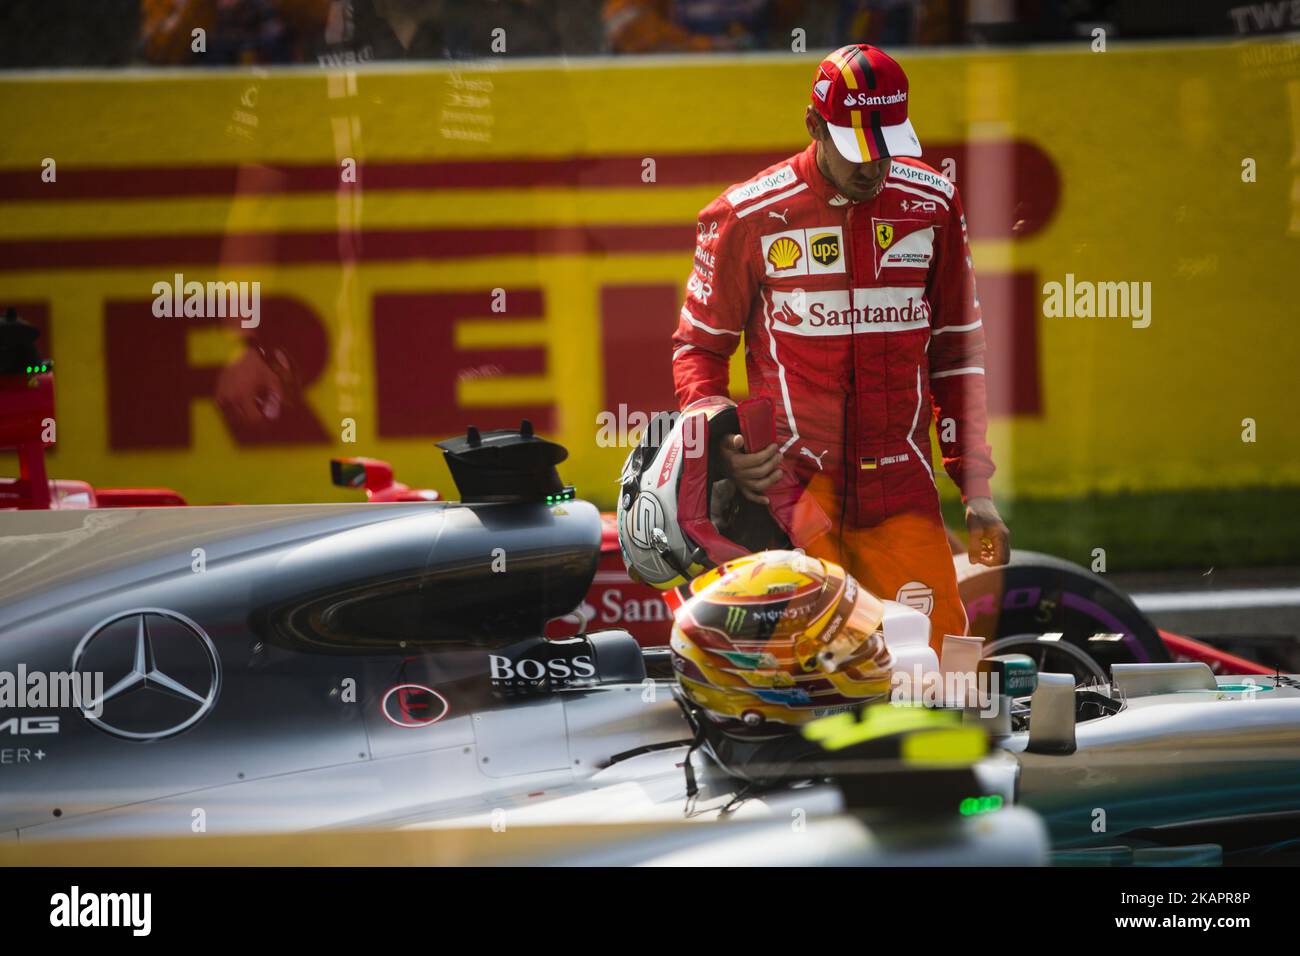 05 VETTEL Sebastian from Germany of scuderia Ferrari inspecting the Mercedes of Lewis Hamilton during the Qualifying of Formula One Belgian Grand Prix at Circuit de Spa-Francorchamps on August 25, 2017 in Spa, Belgium. (Photo by Xavier Bonilla/NurPhoto) Stock Photo